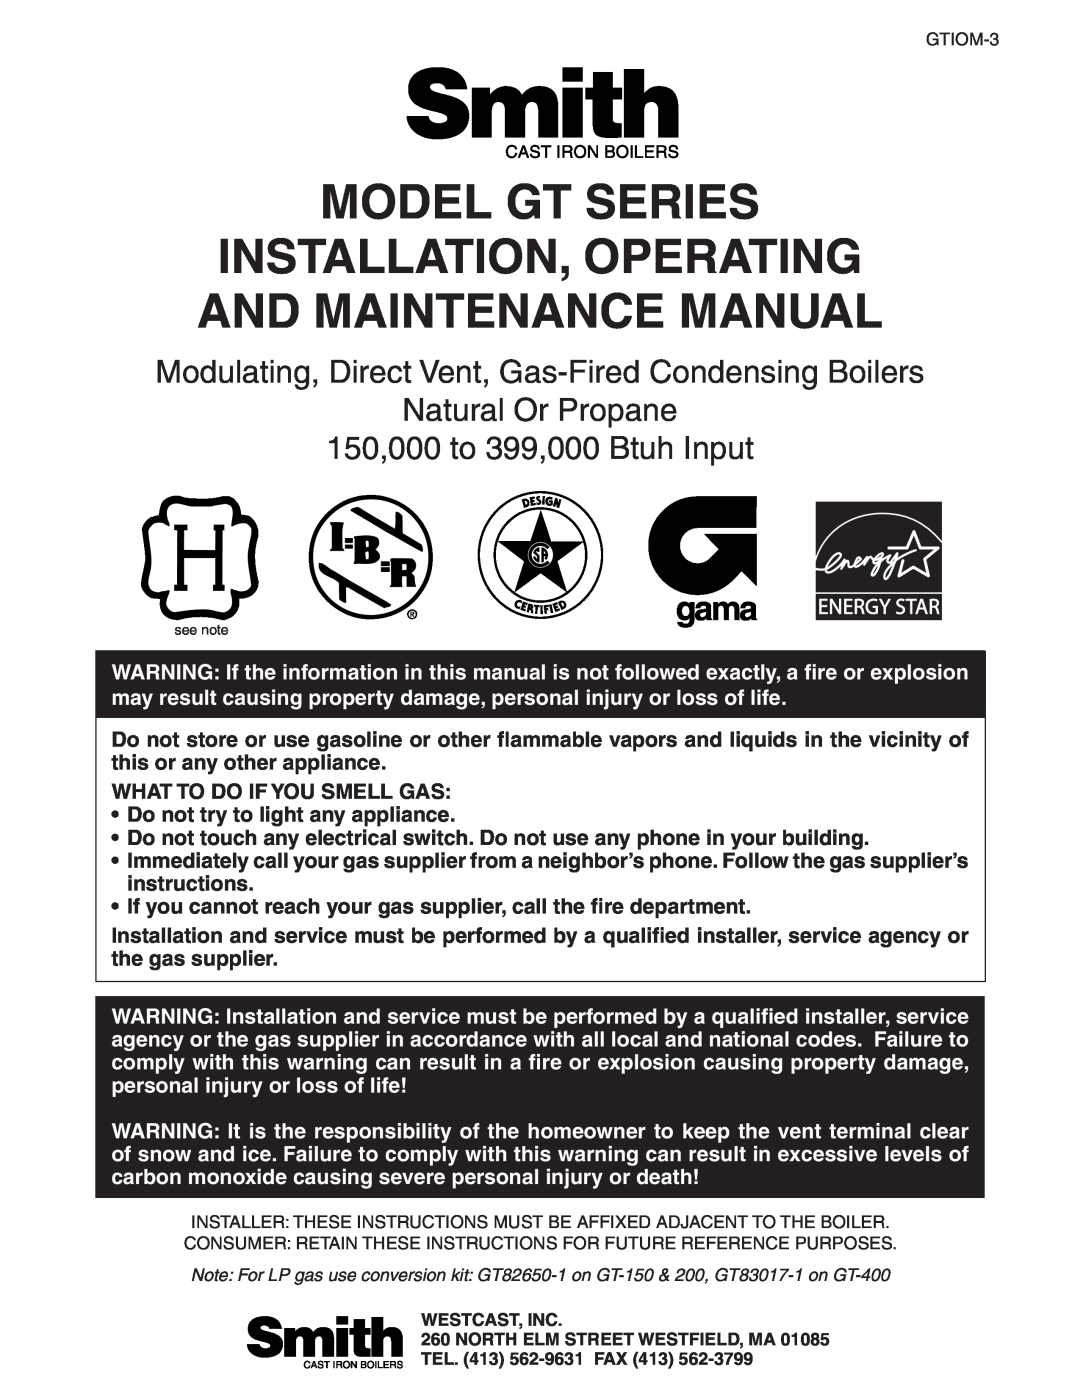 Smith Cast Iron Boilers GT Series manual Model Gt Series, Installation, Operating And Maintenance Manual, gama ENERGY STAR 